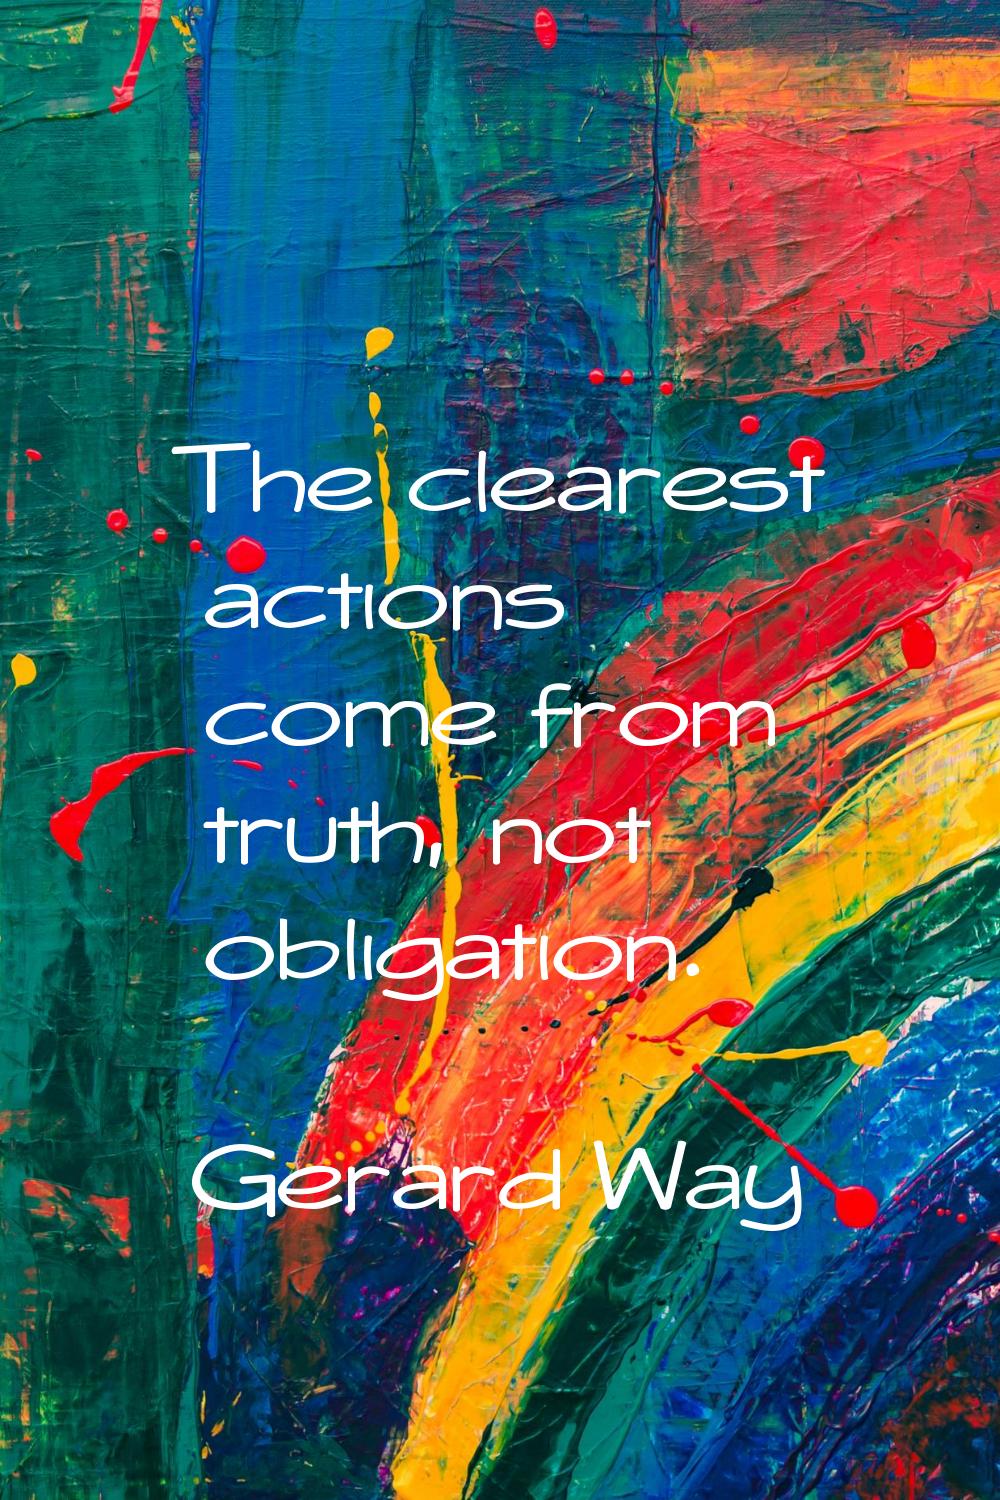 The clearest actions come from truth, not obligation.